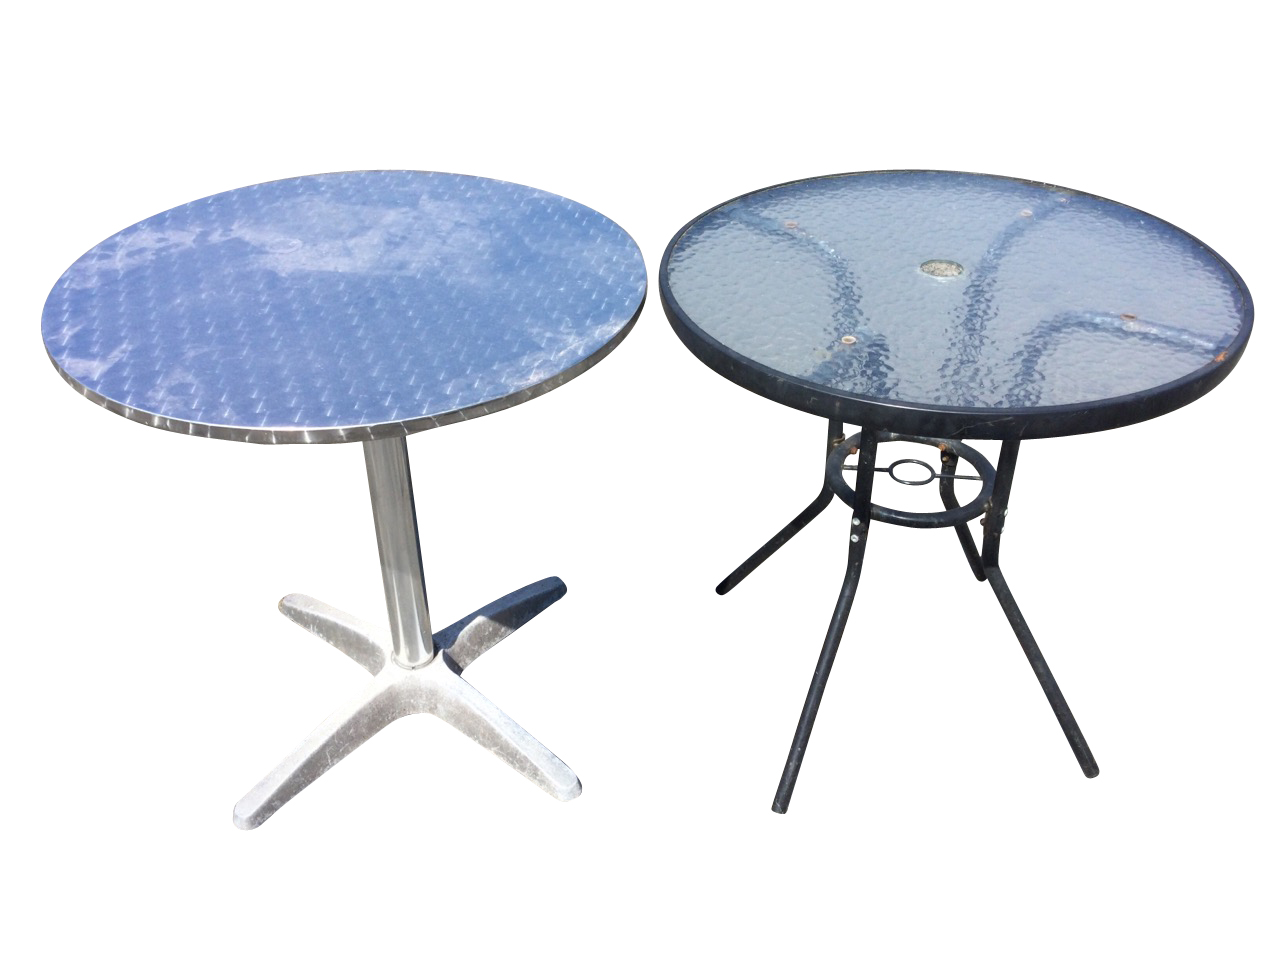 A circular aluminium pub type table on column with four legs; and a circular mottled glass topped